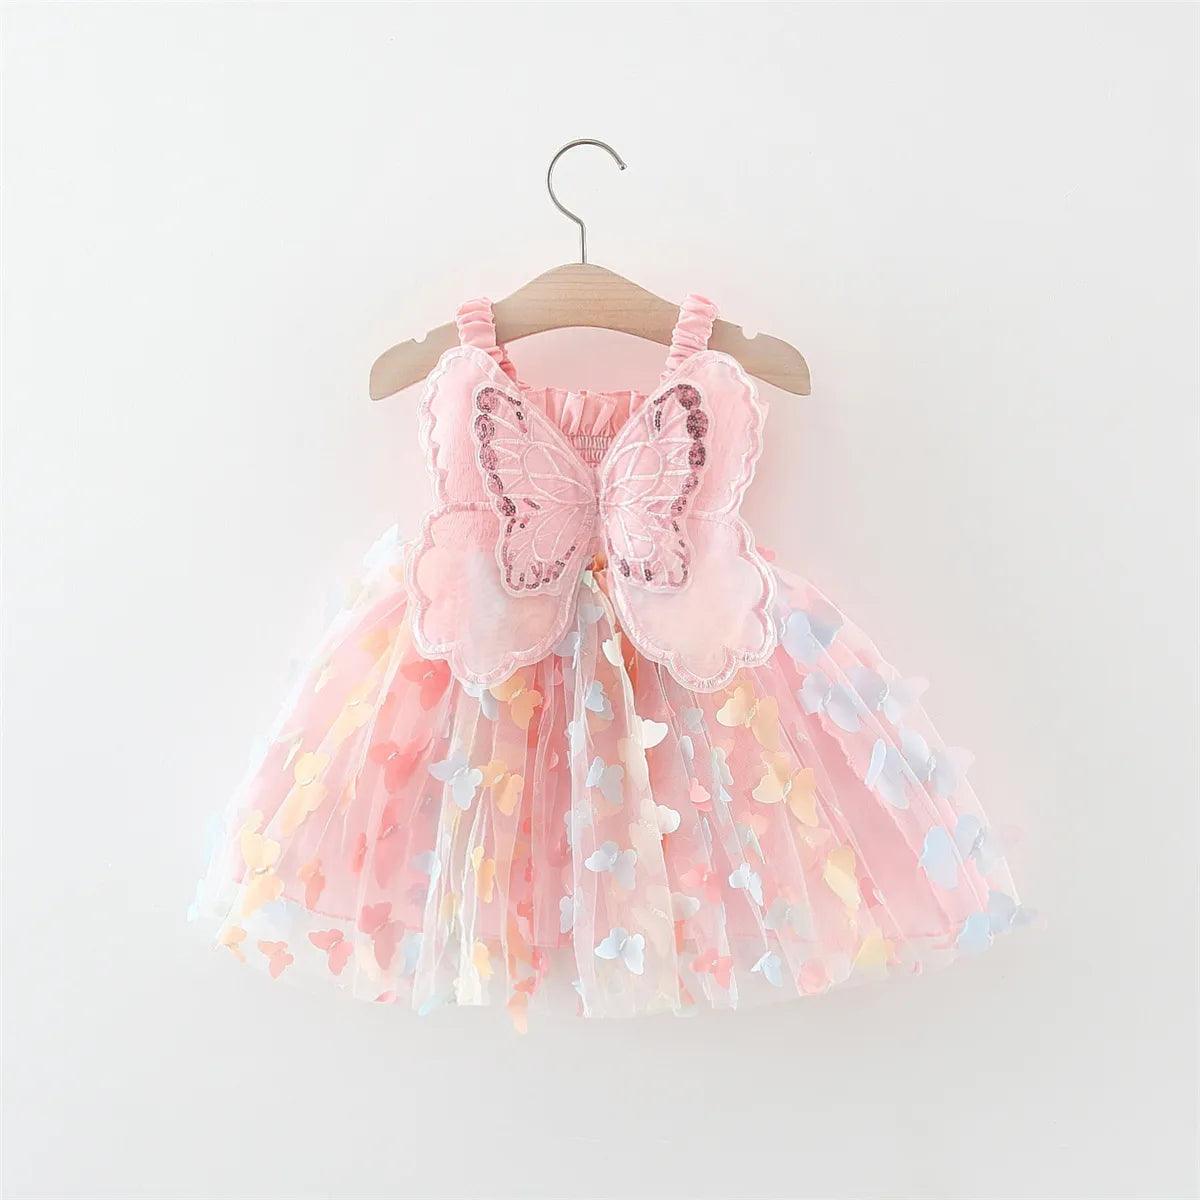 Enchanted Summer Fairy Princess Birthday Dress with Butterfly Embroidery  ourlum.com   